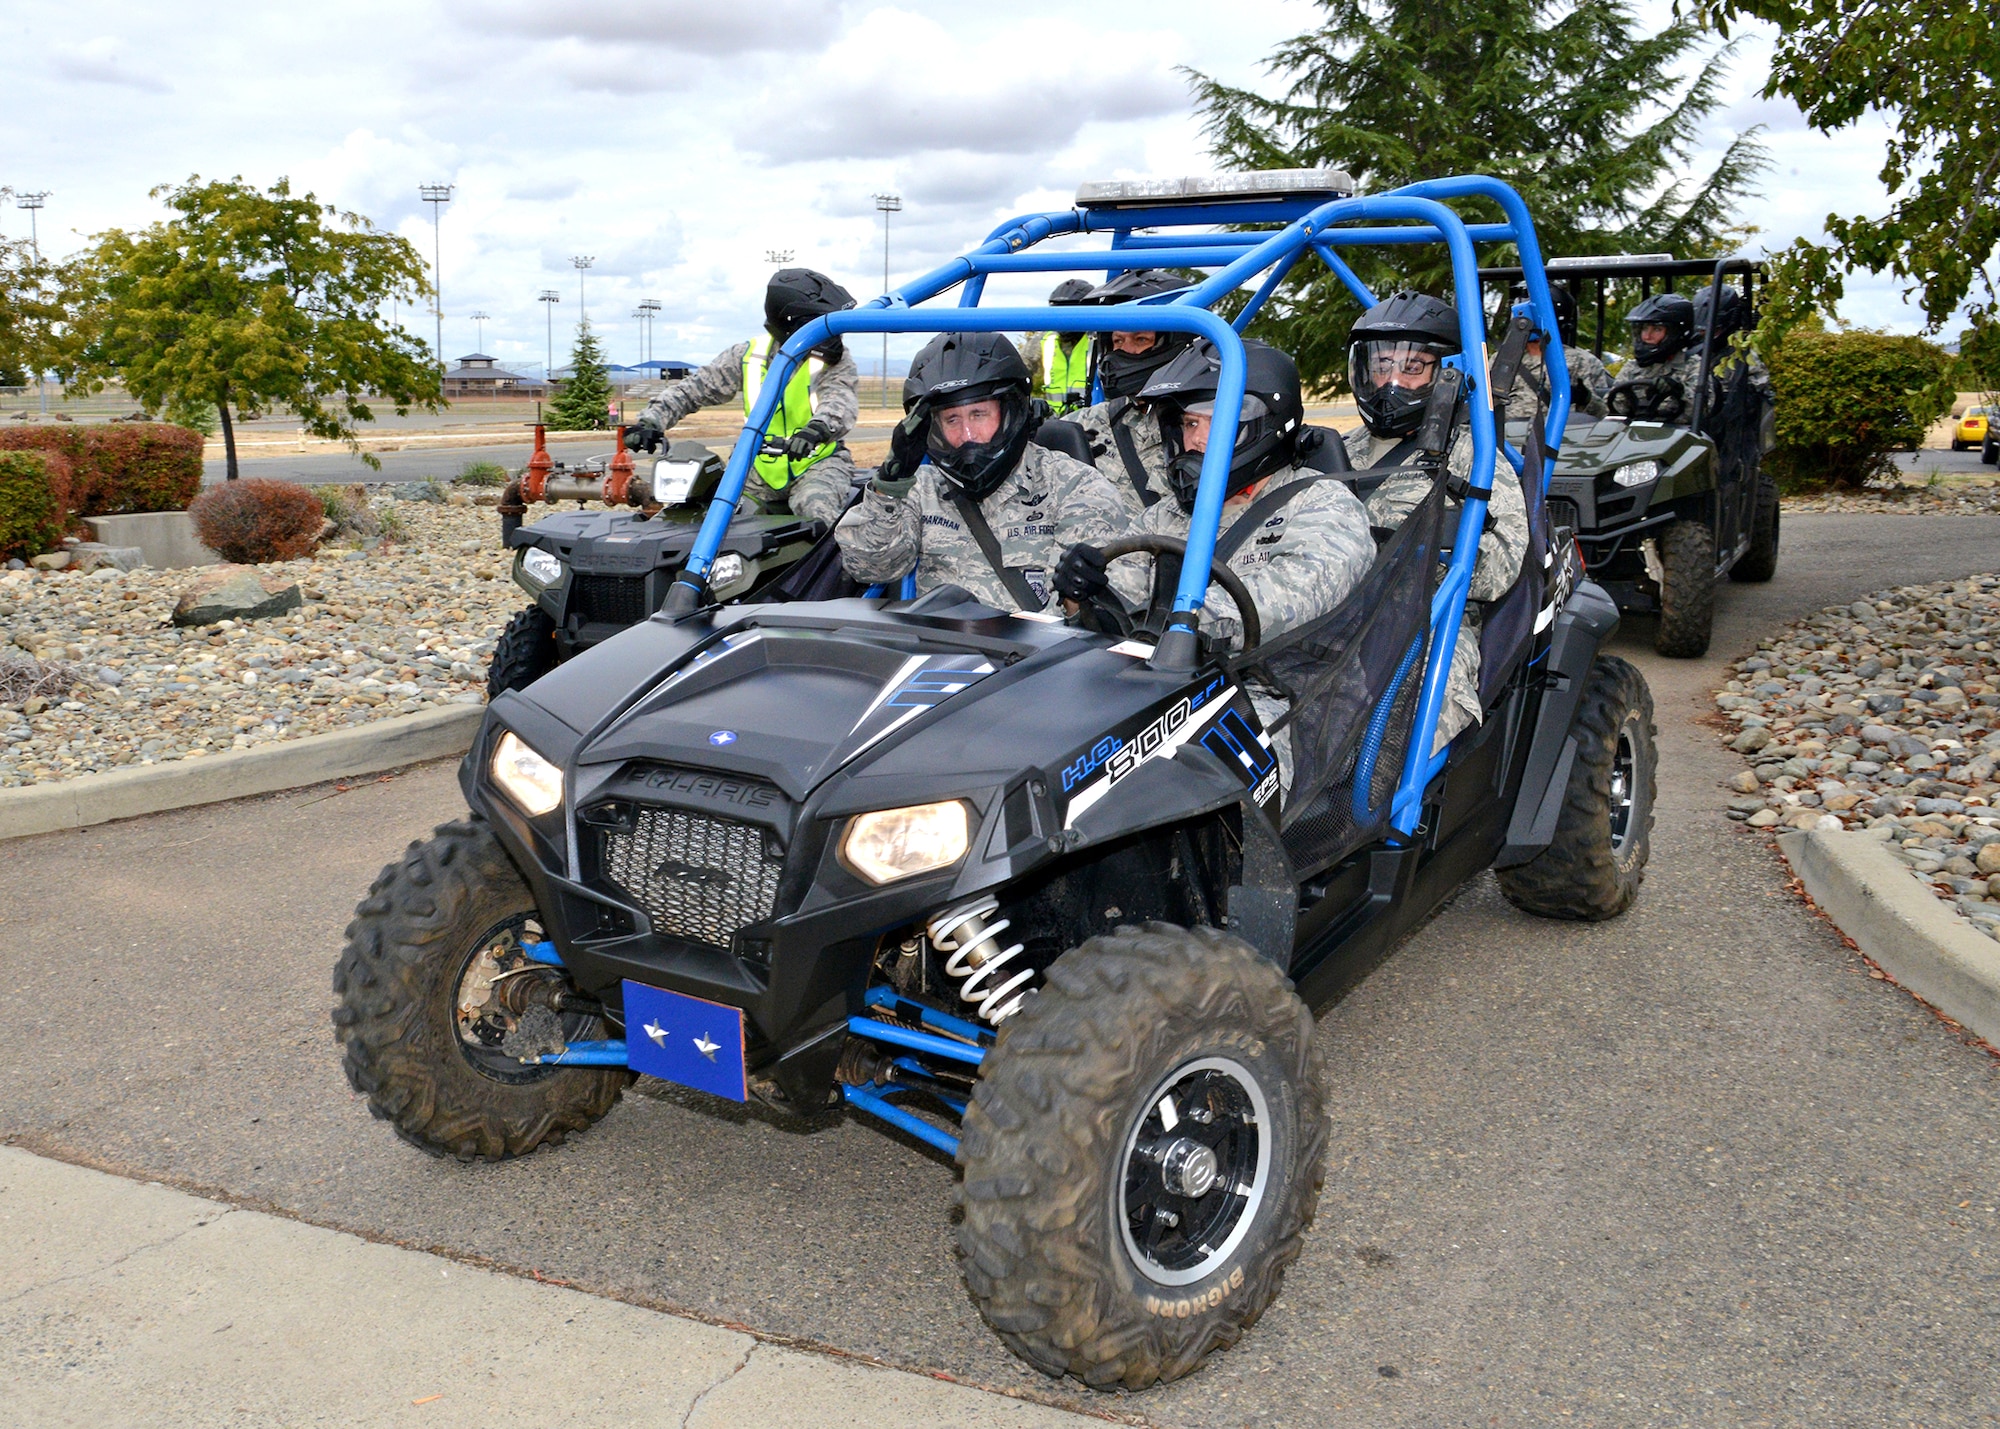 Maj. Gen. John Shanahan, 25th Air Force commander, and Chief Master Sgt. Roger Towberman, 25th AF command chief, ride on an all-terrain vehicle with members from the 9th Security Forces Squadron around the perimeter of Beale Air Force Base, Calif., Oct. 15, 2014.  Shanahan and Towberman visited Beale for the first time since the Sept. 29 re-alignment of the 9th Reconnaissance Wing to the 25th AF. (U.S Air Force photo by John Schwab/Released)